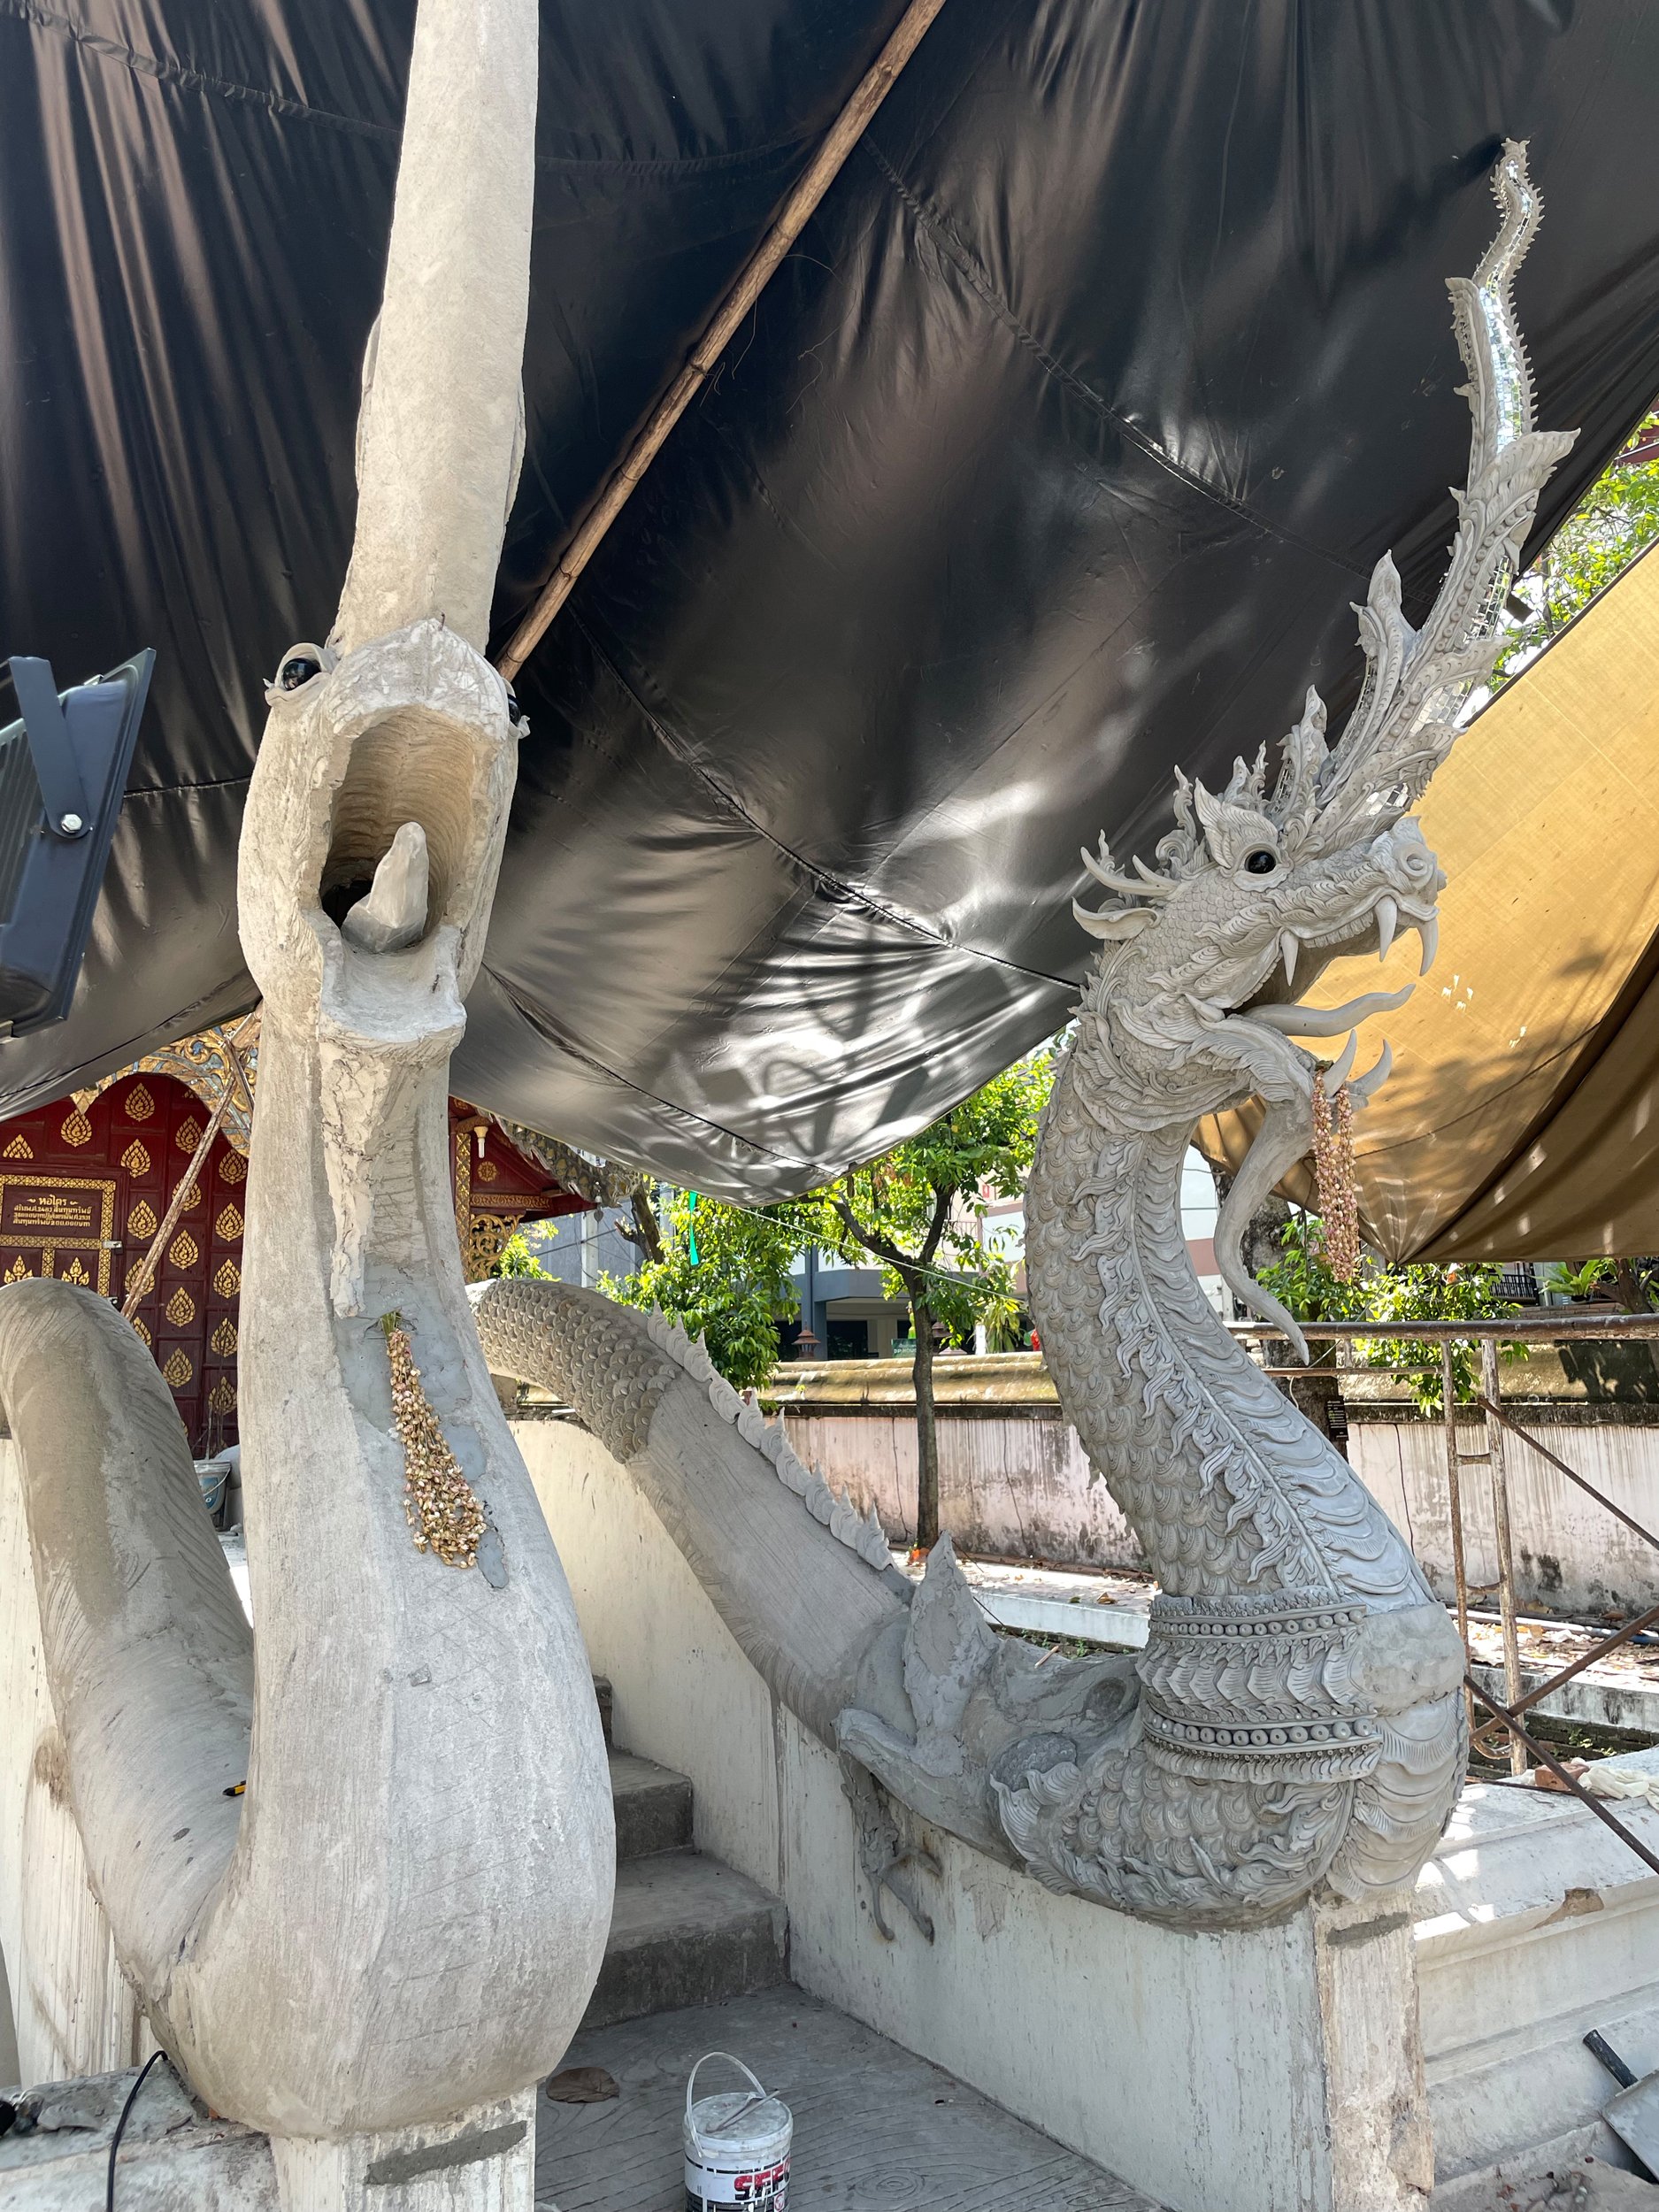 Finding my subject, an elaborate concrete Naga sculpture in progress at the temple of Wat Chiang Man